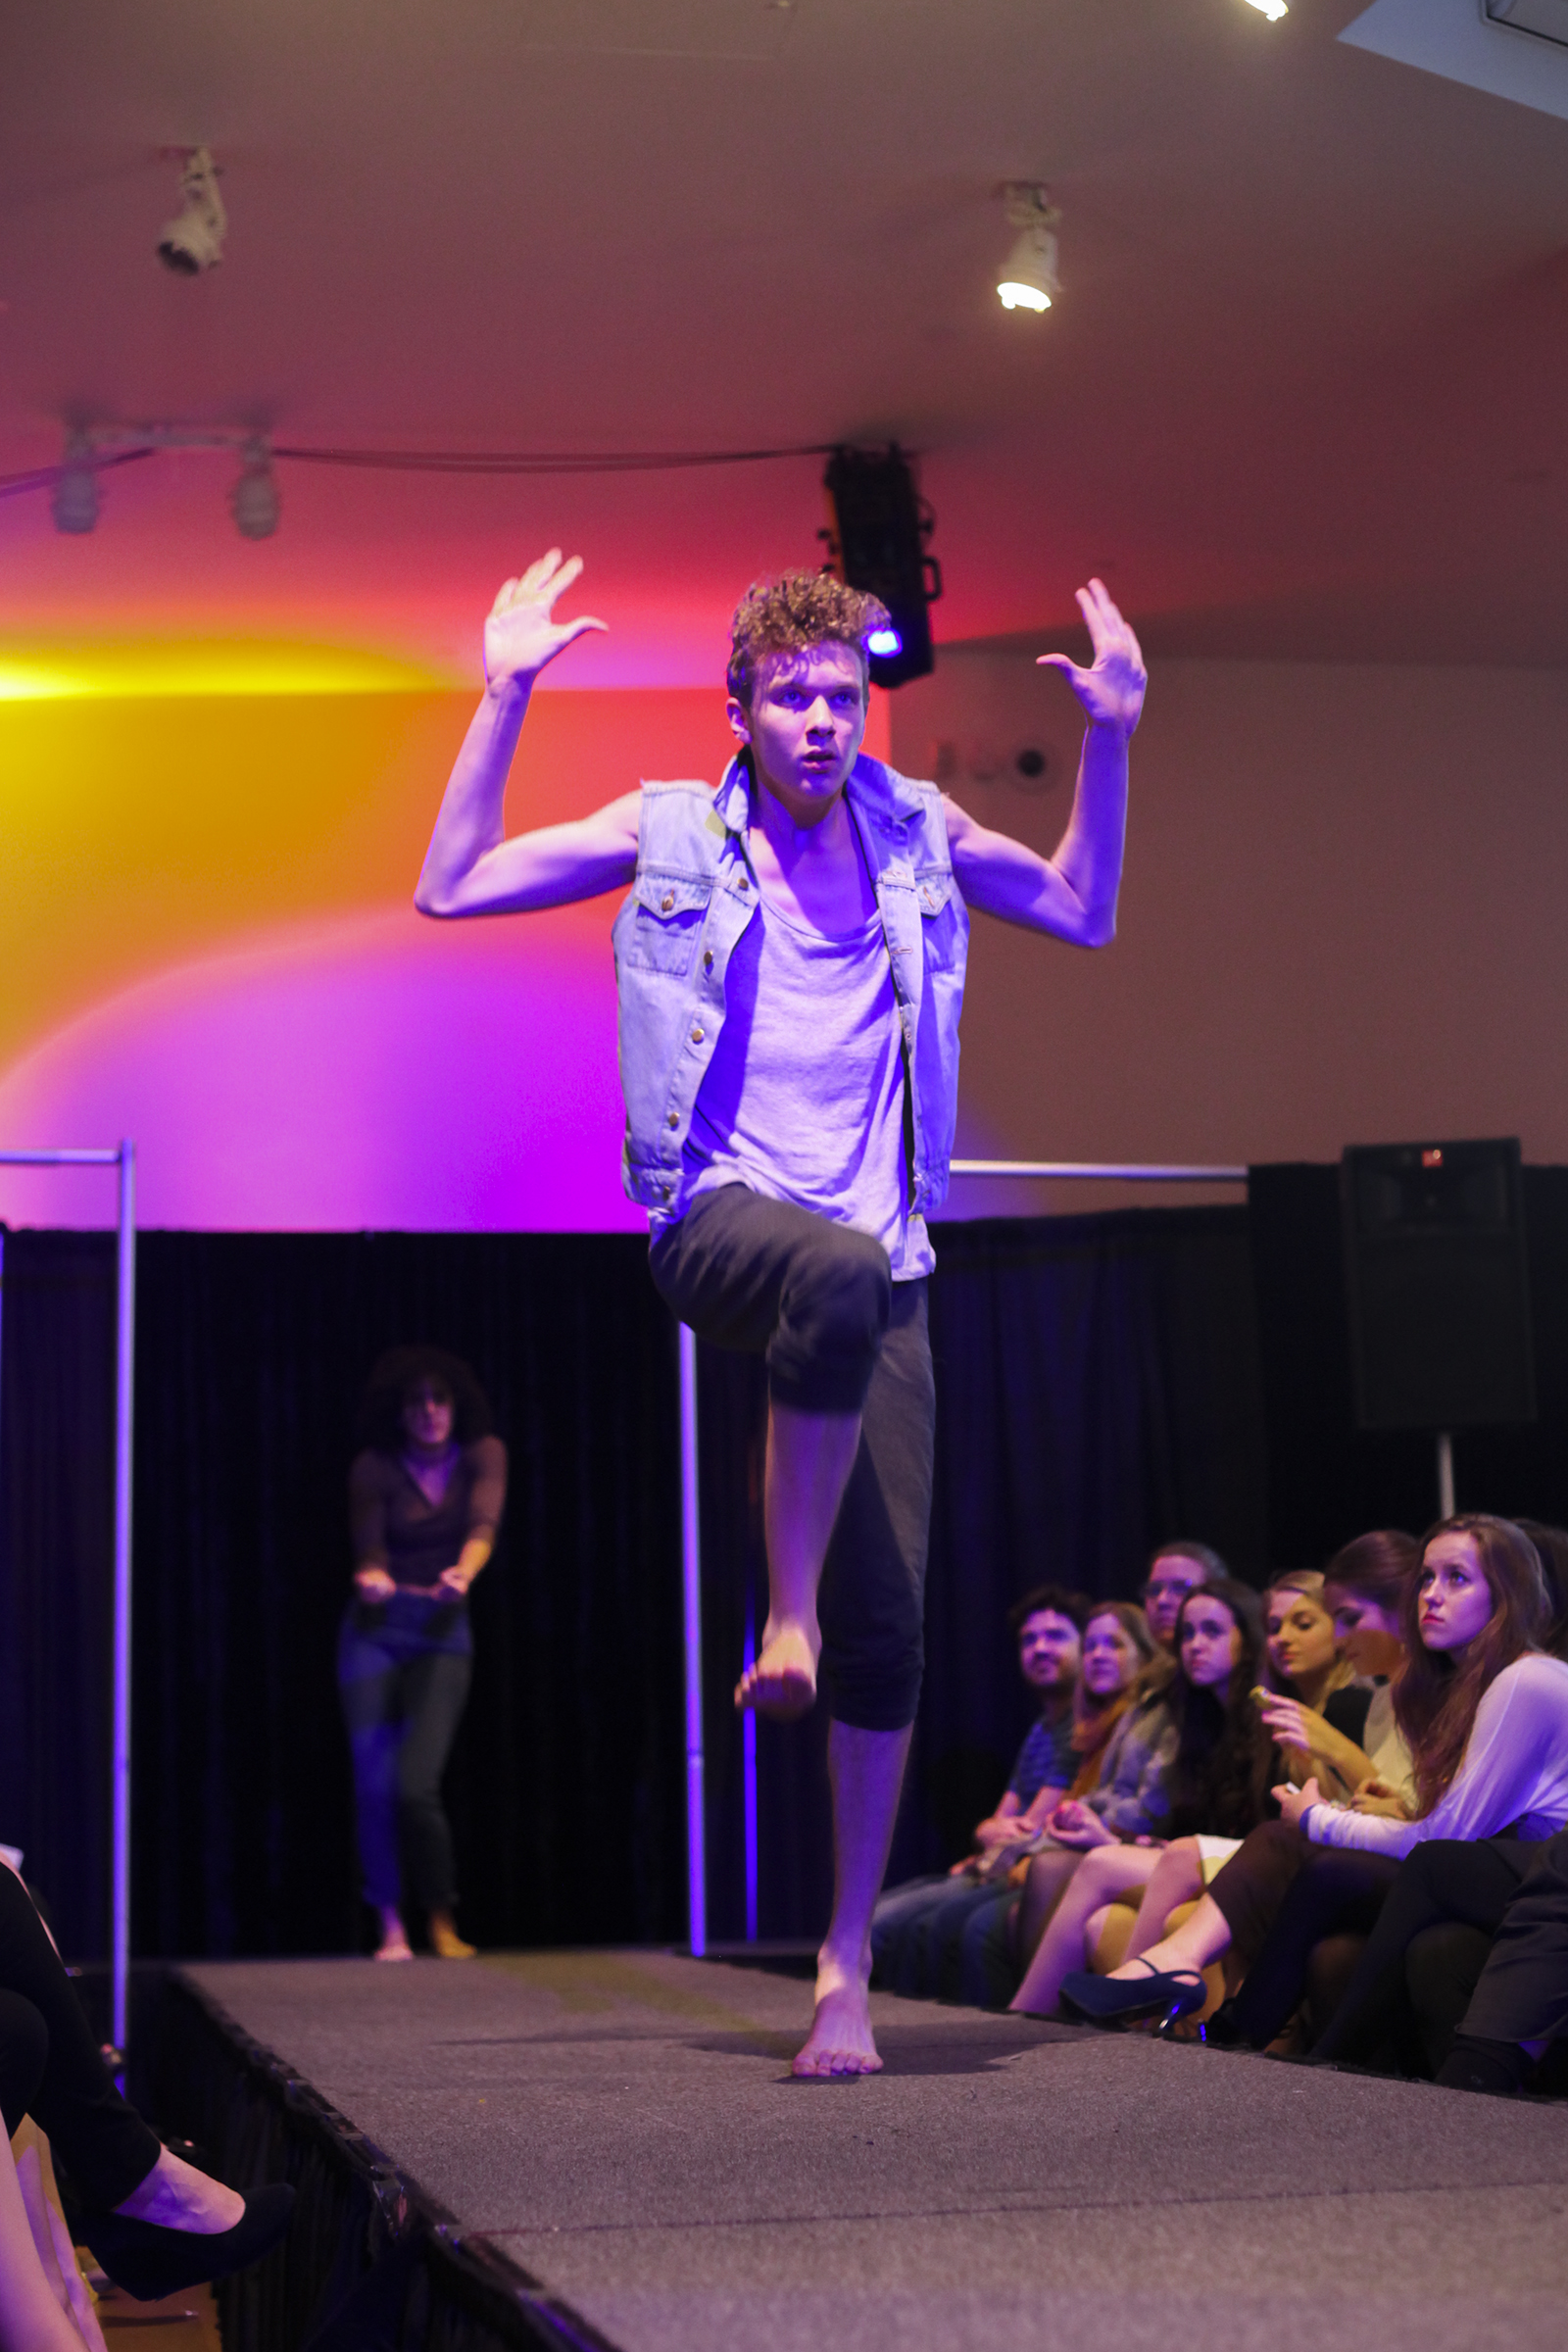 "Reach" choreographed by John-Mark, Photo by Amy Gee